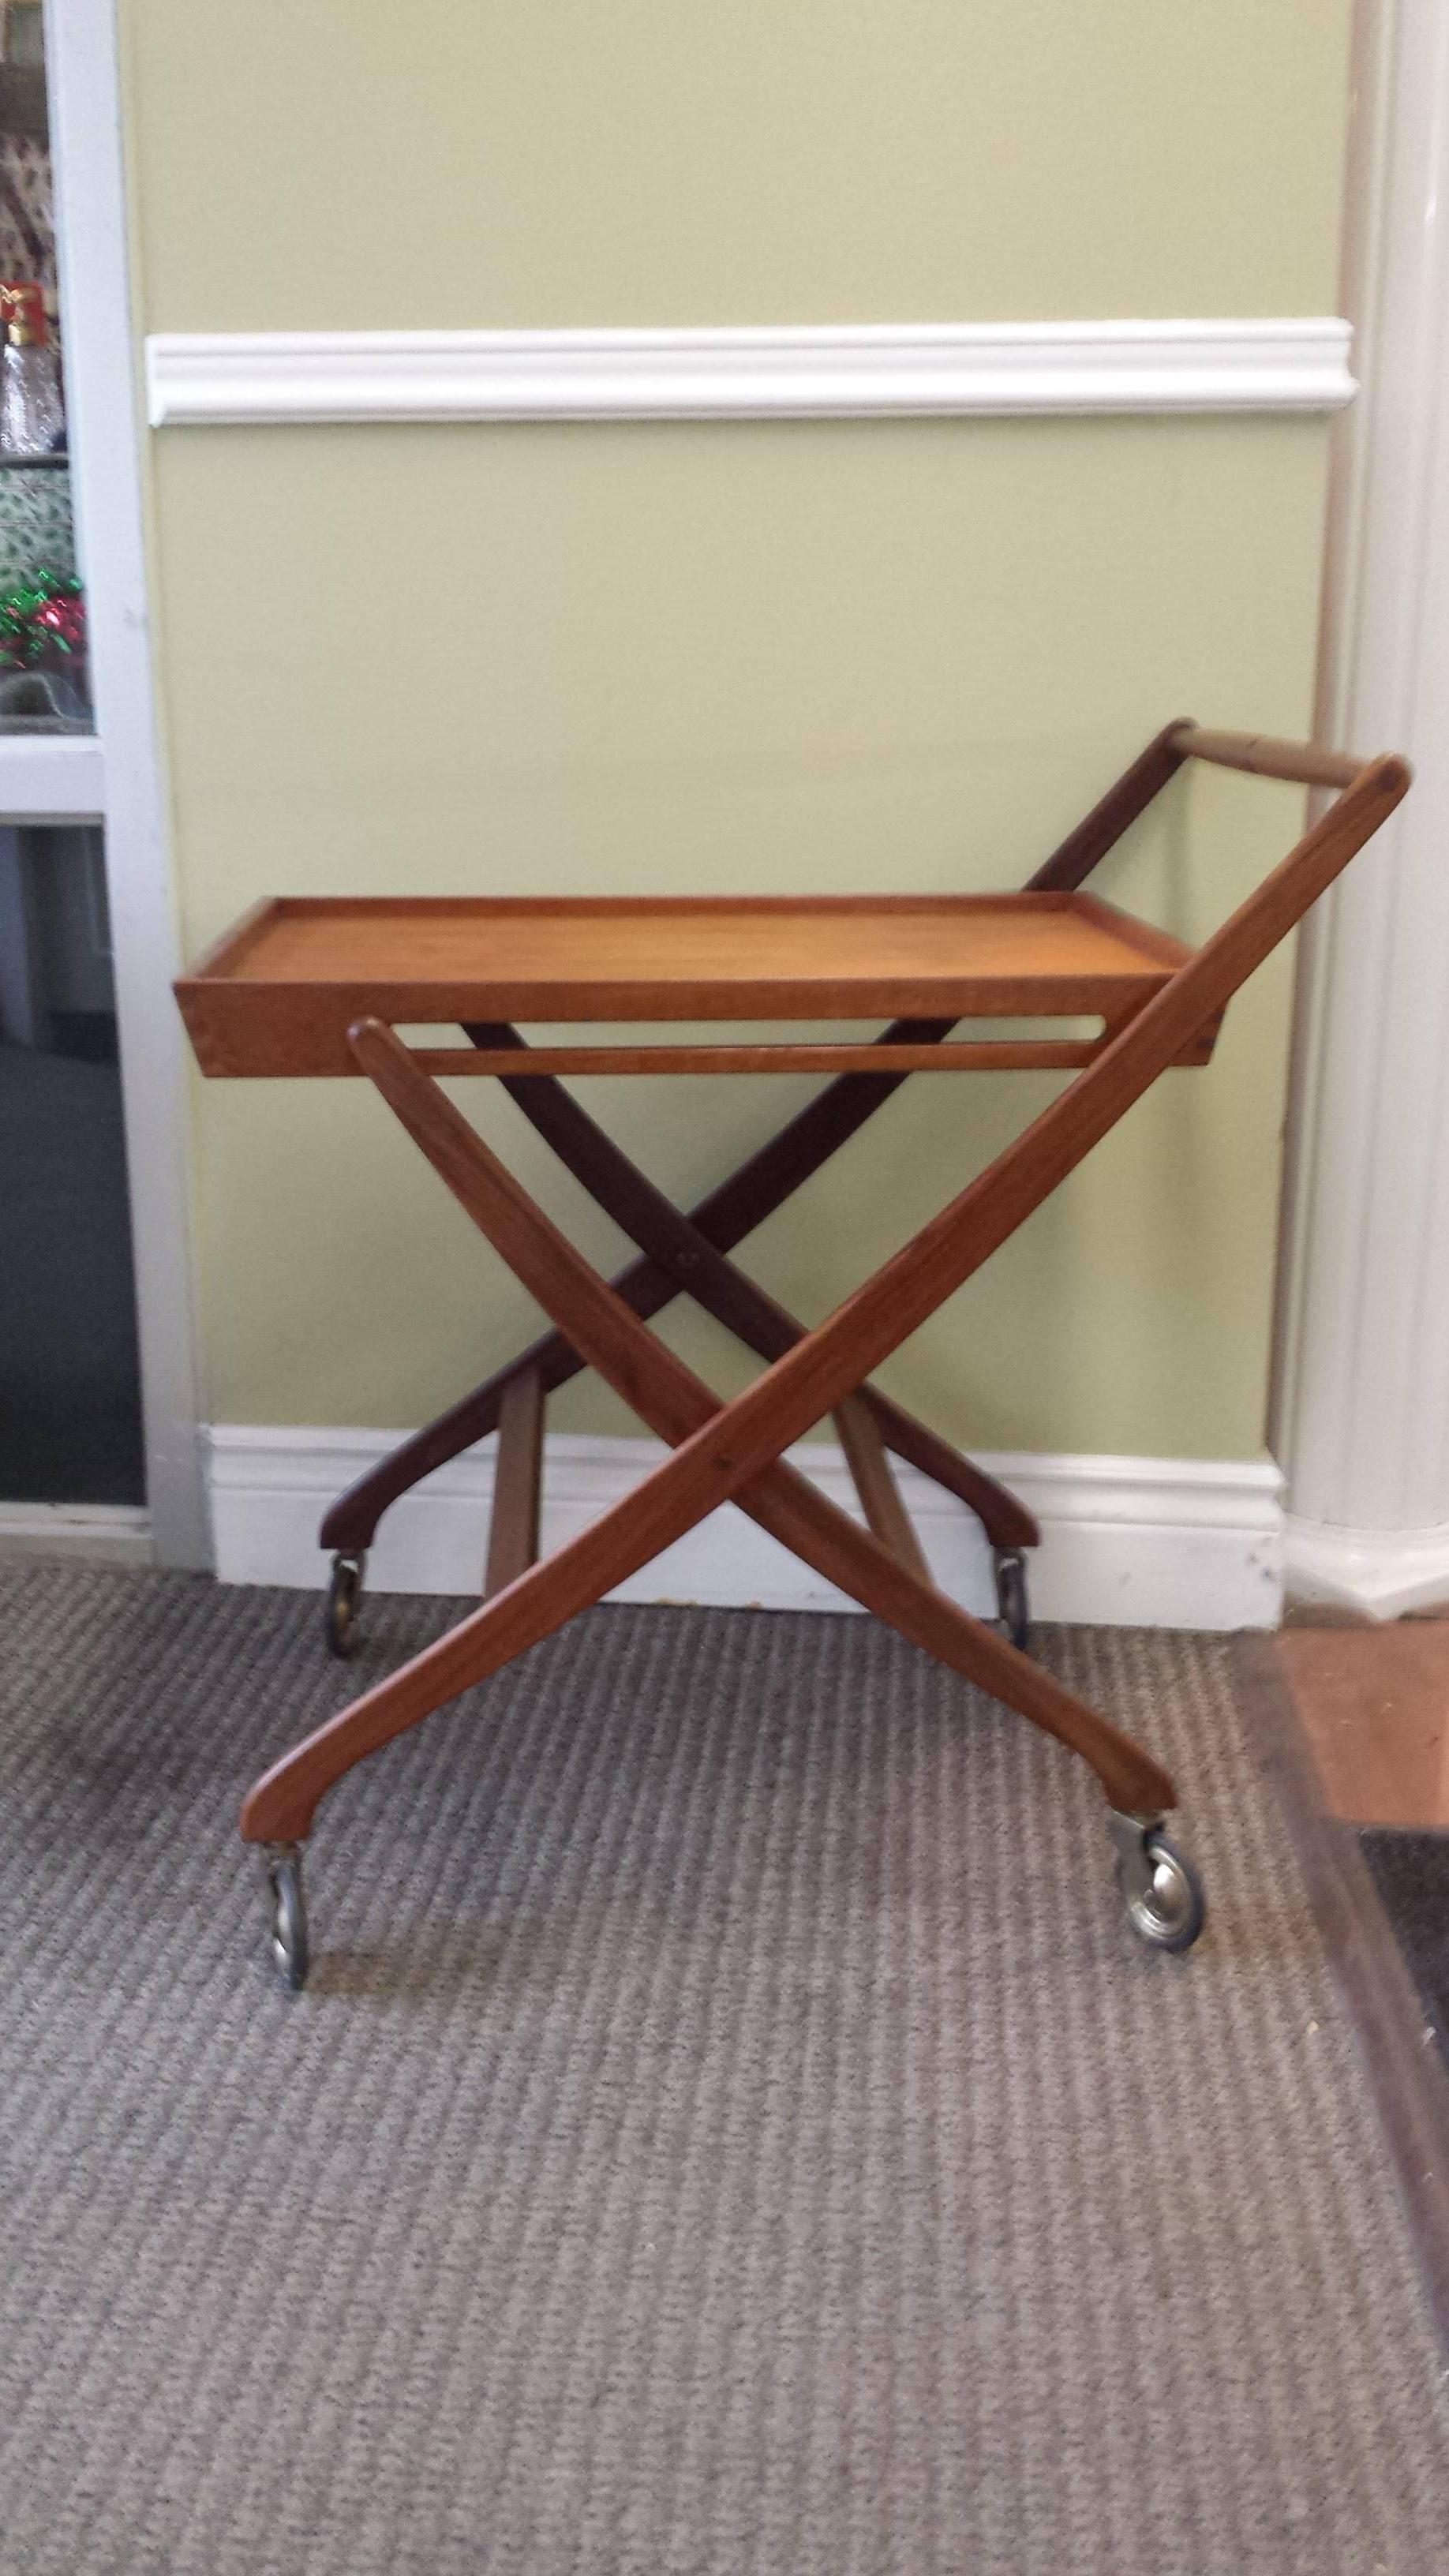 Mid-Century Modern Danish Folding Bar Cart, With Danish Maker/ Control  Mark on bottom stamp. The Cart has 4 -Original Casters, probably 1960's. The cart measures 29"-inches long x 20"-inches wide x 30"-inches to the top of the